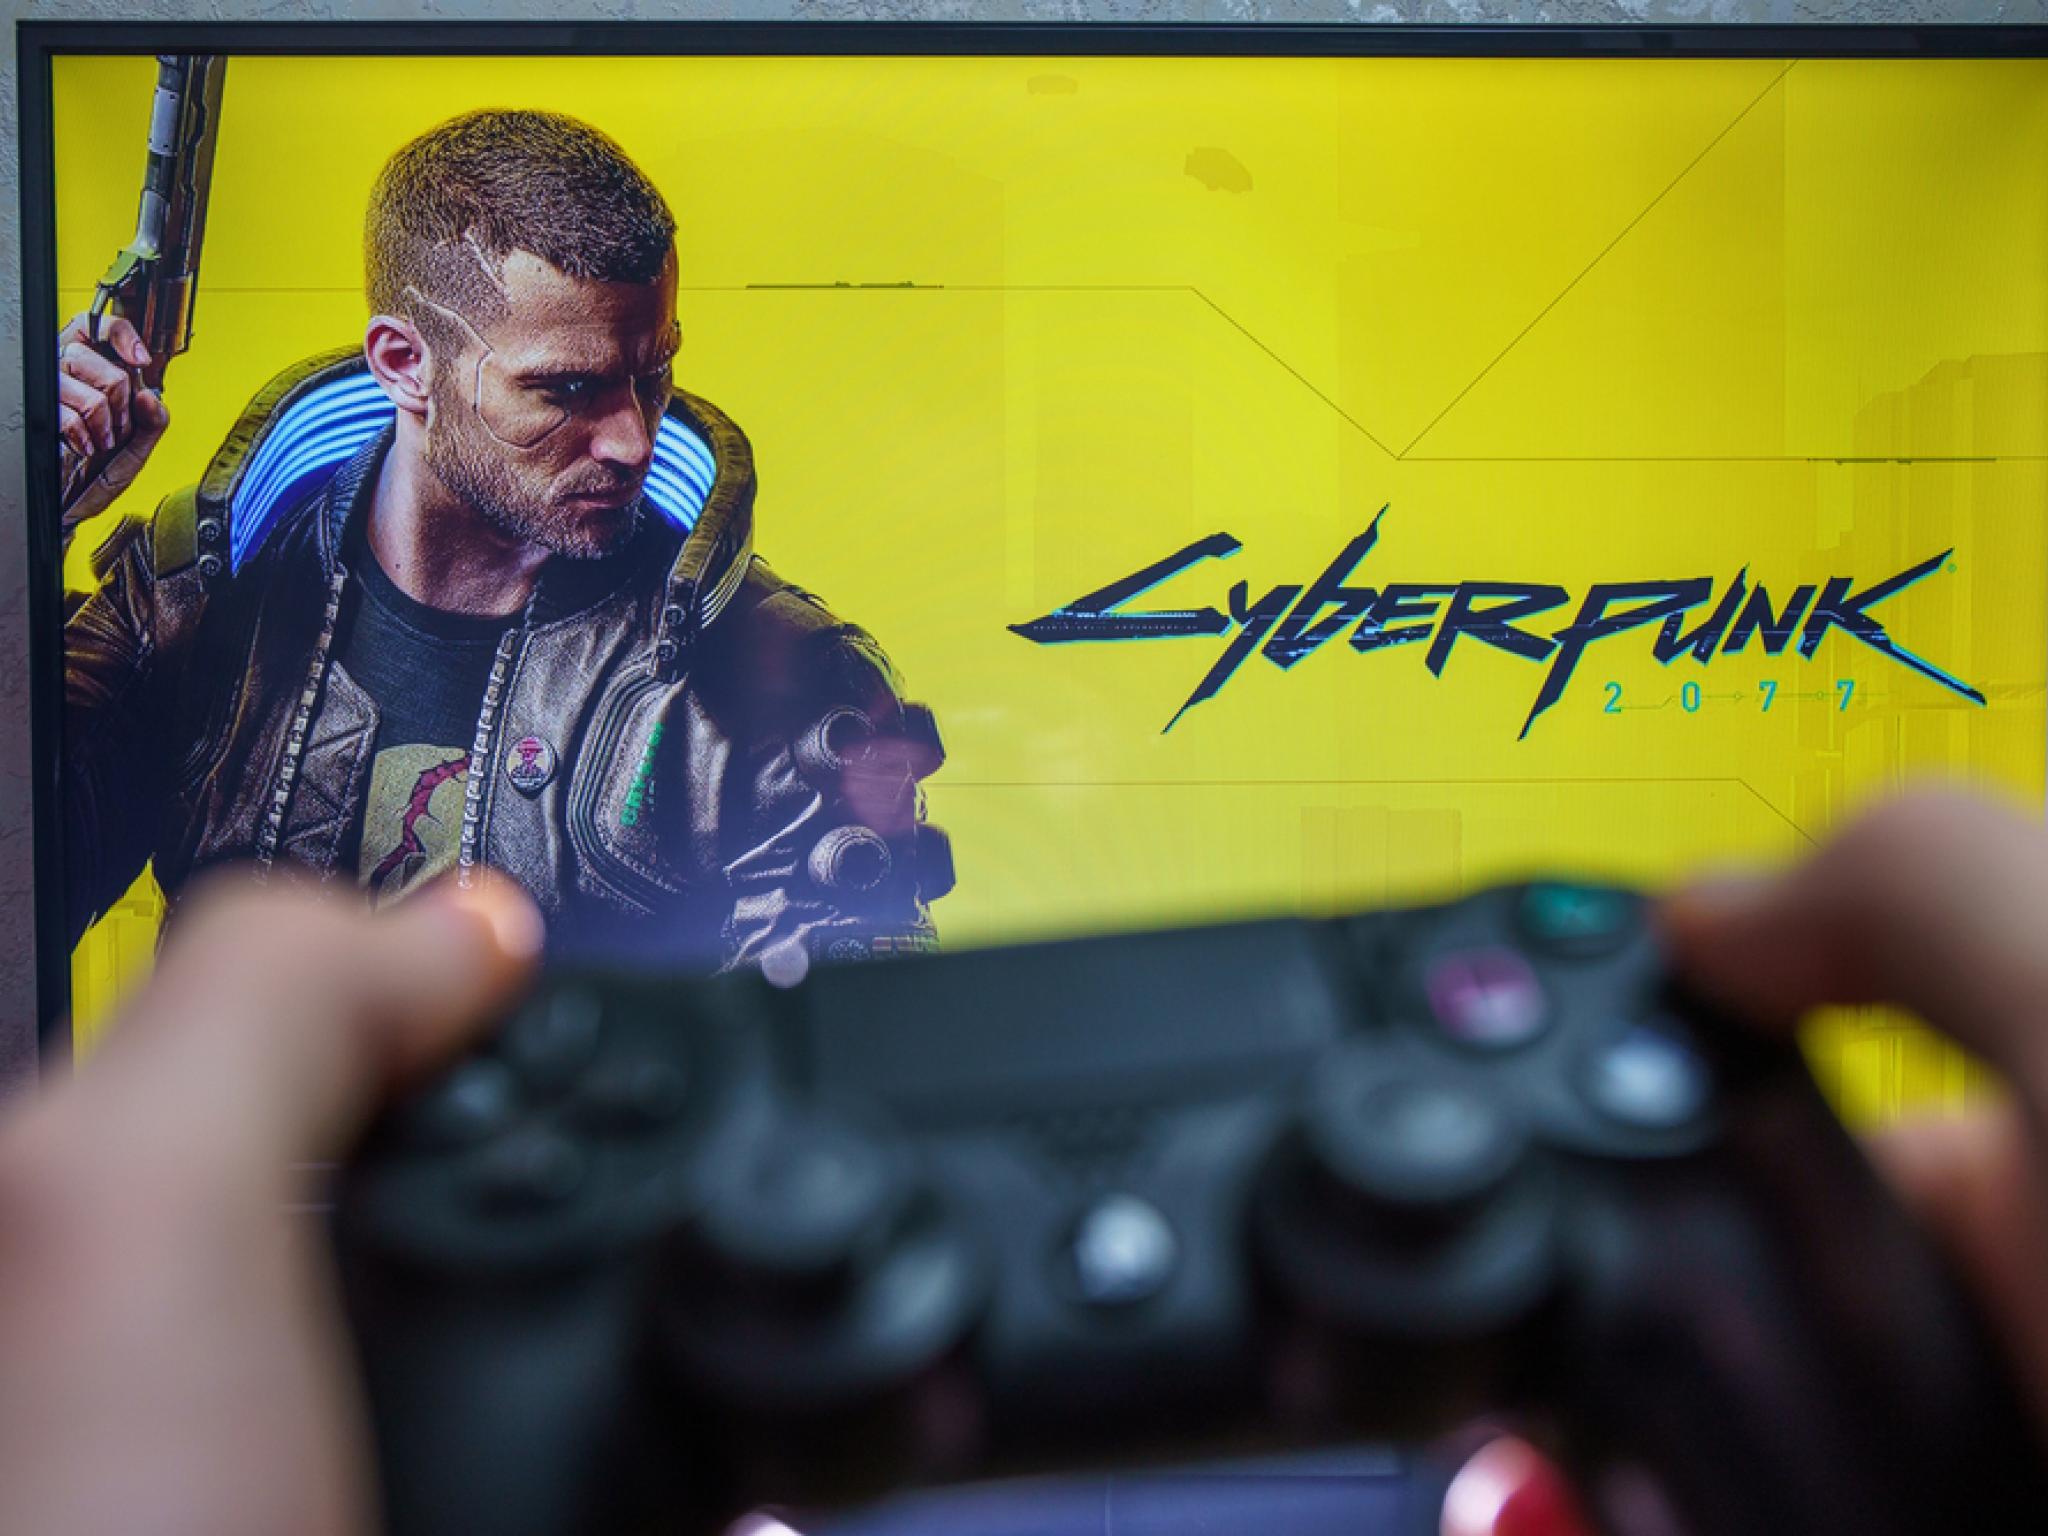  25m-cyberpunk-2077-sales-the-845m-expansion-transforms-its-fate 